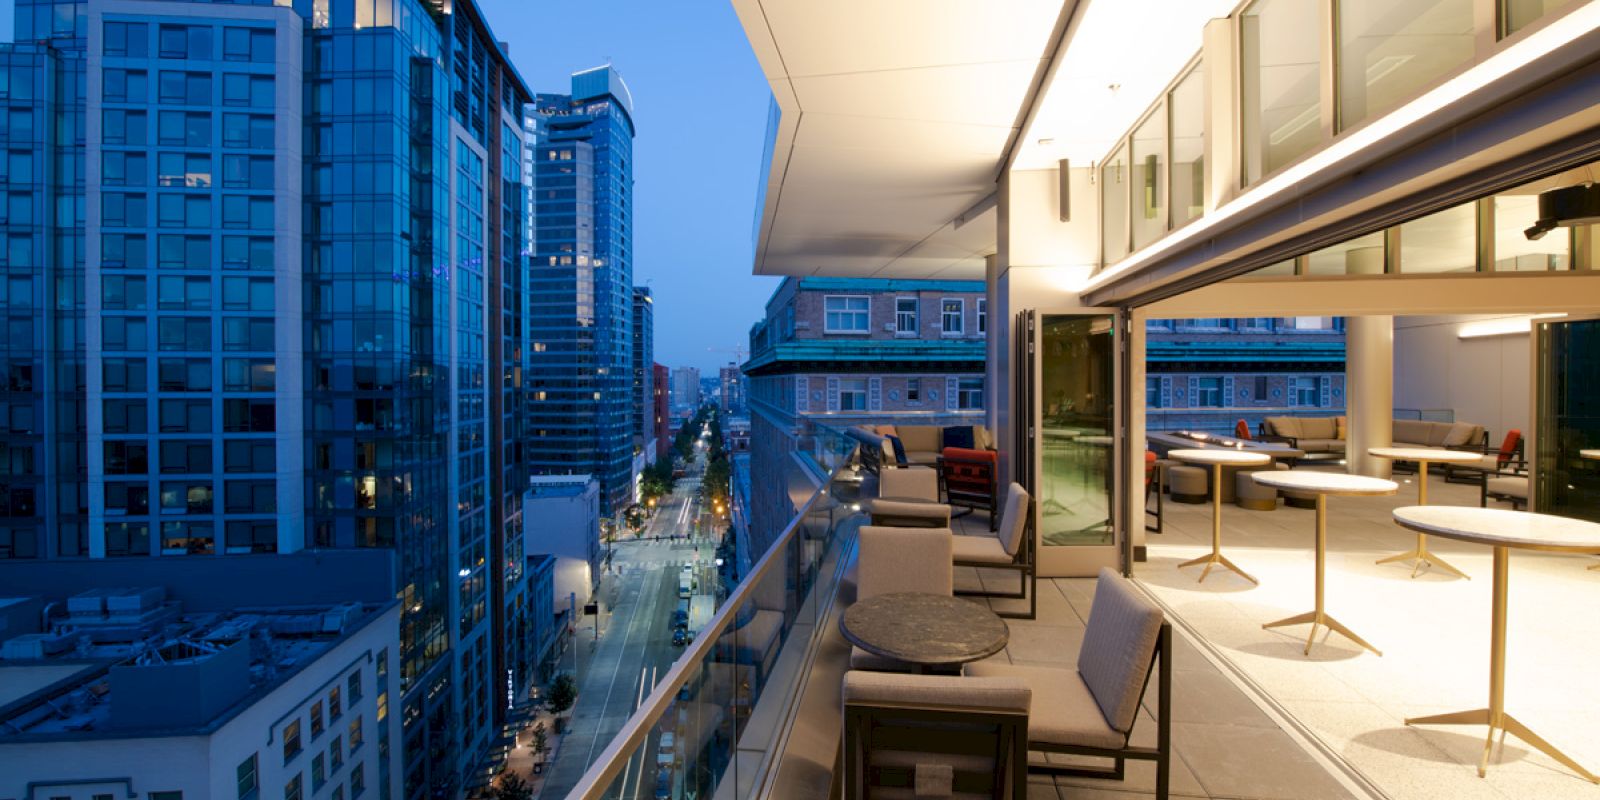 A modern cityscape with high-rise buildings at dusk, featuring a spacious balcony with dining tables and chairs overlooking the busy street.